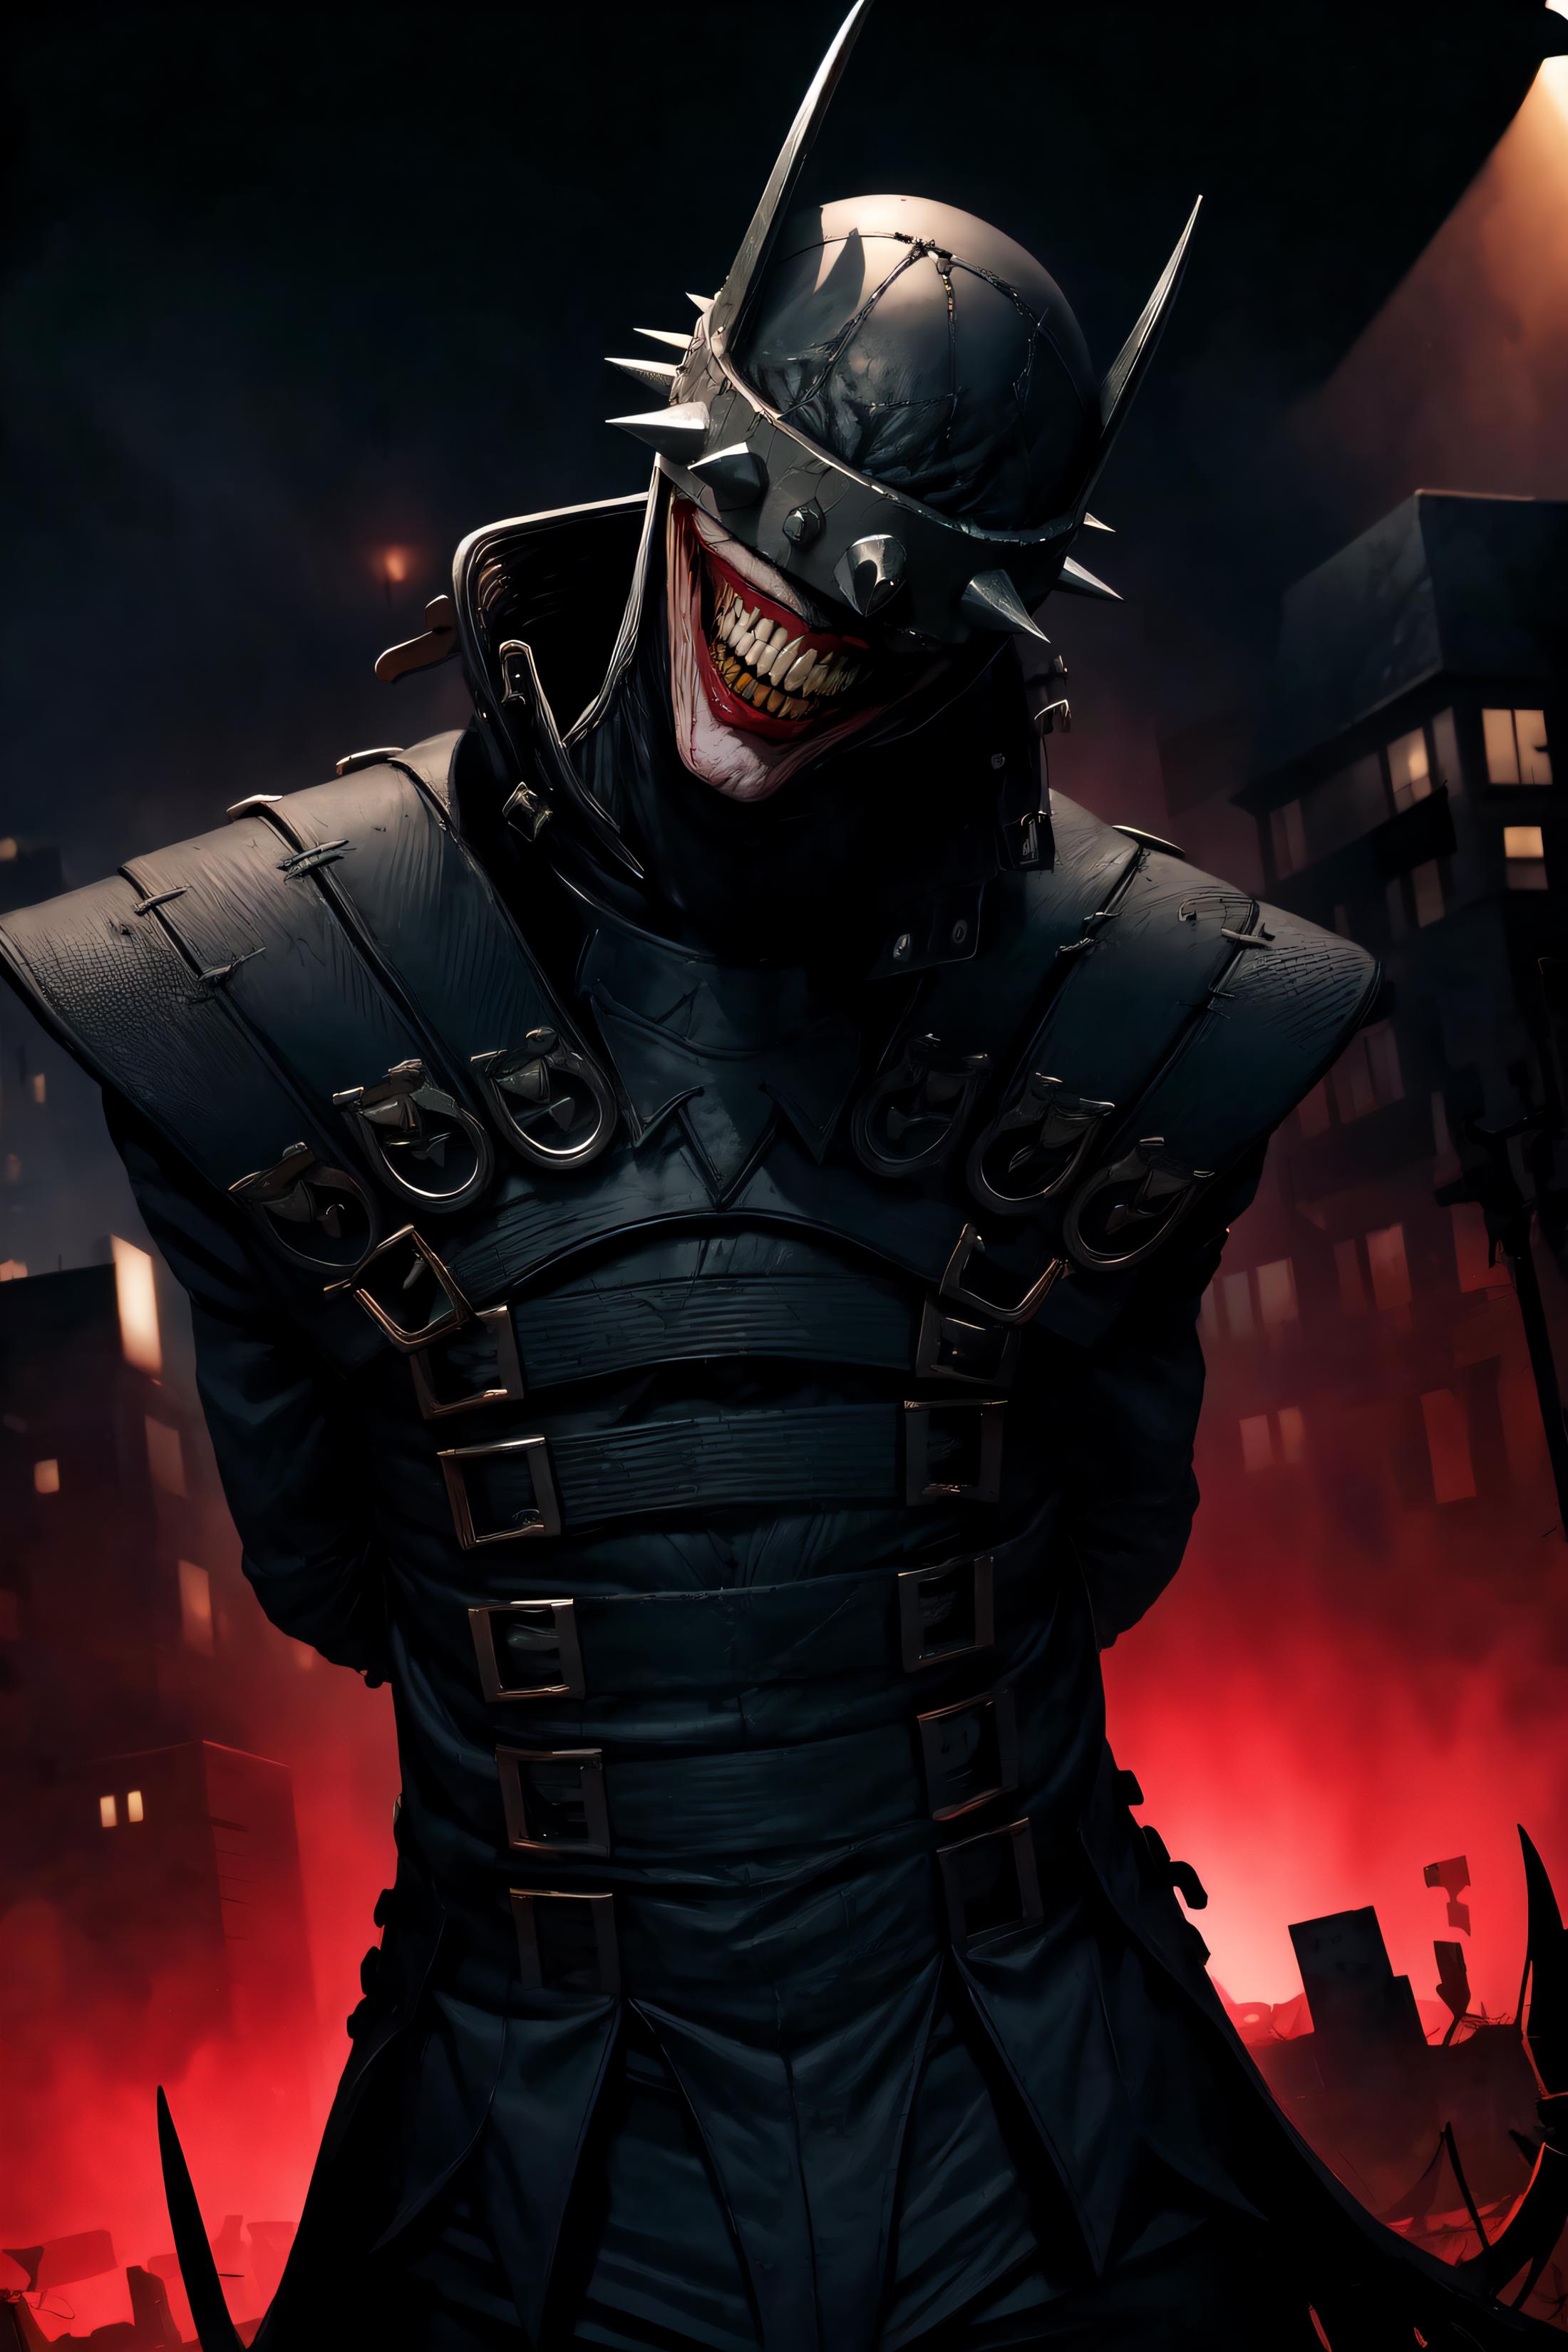 The Batman Who Laughs image by Xypher